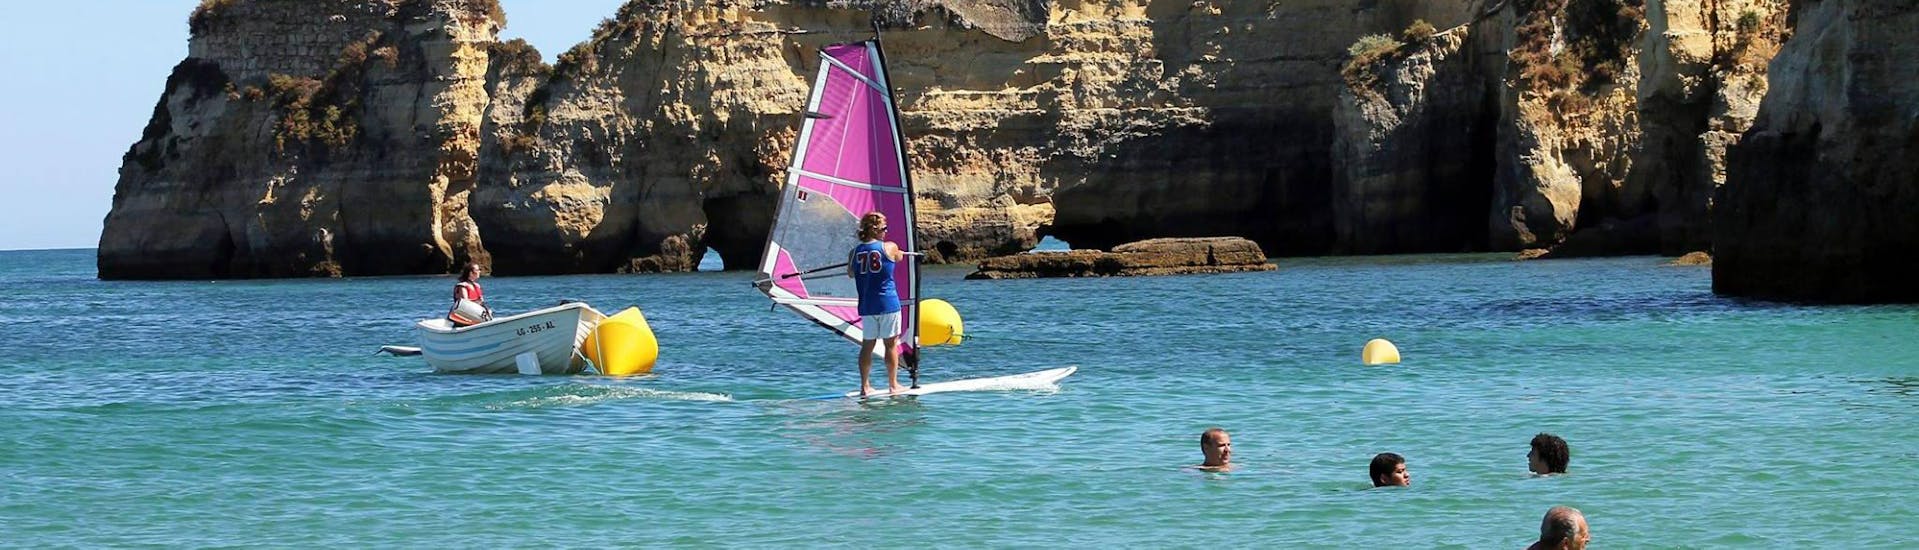 A guy is having fun during the Private Windsurfing Lessons for Kids & Adults - All Levels.